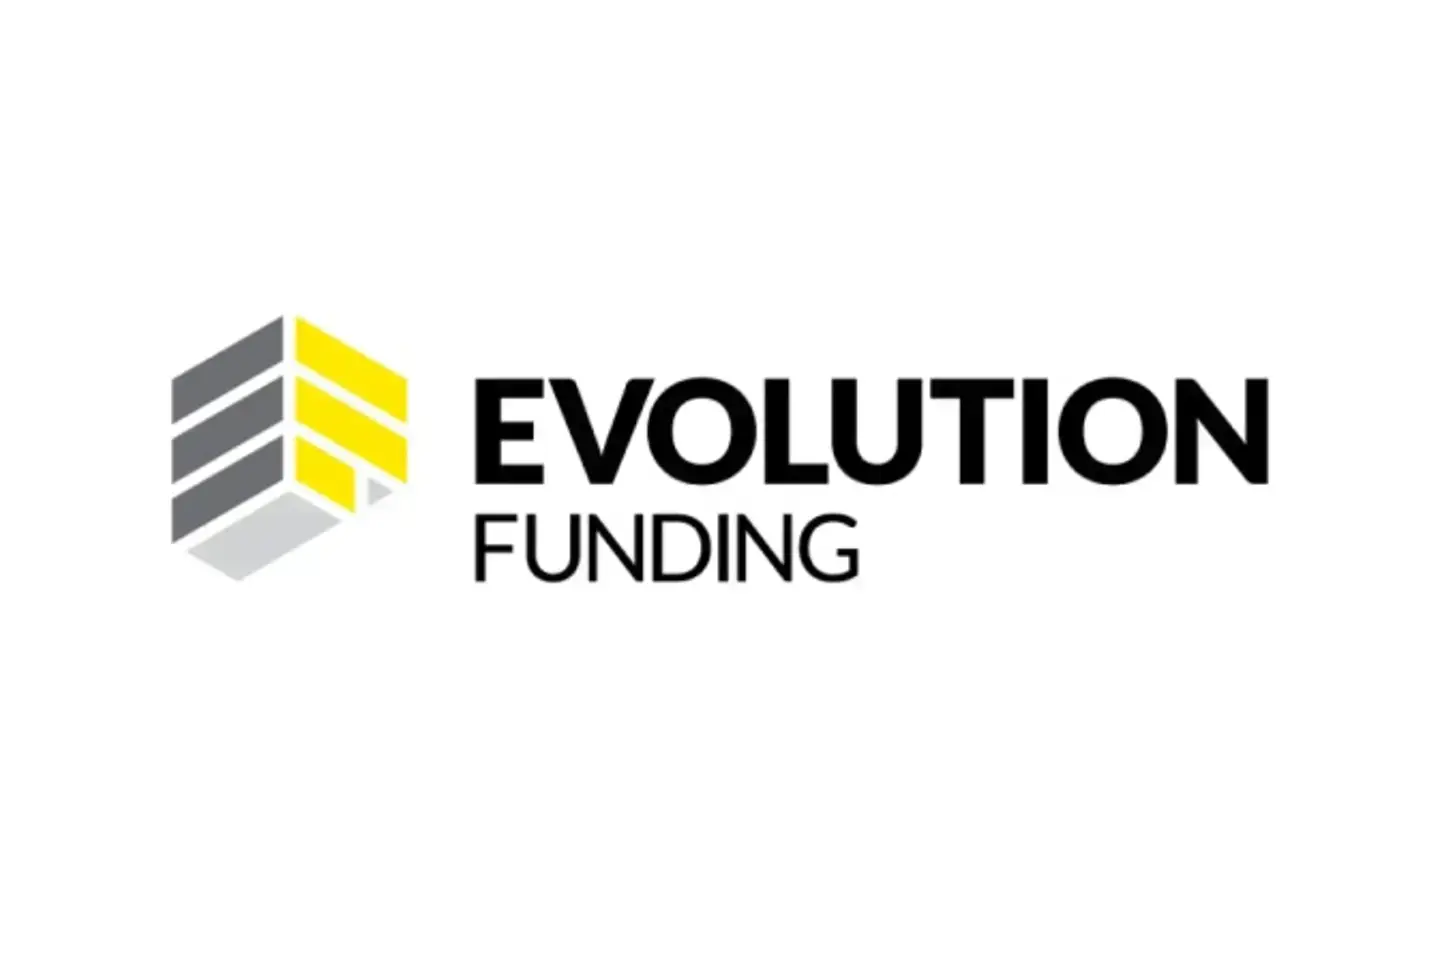 The company's yellow and grey logo features on the left, next to capitalised text EVOLUTION FUNDING.